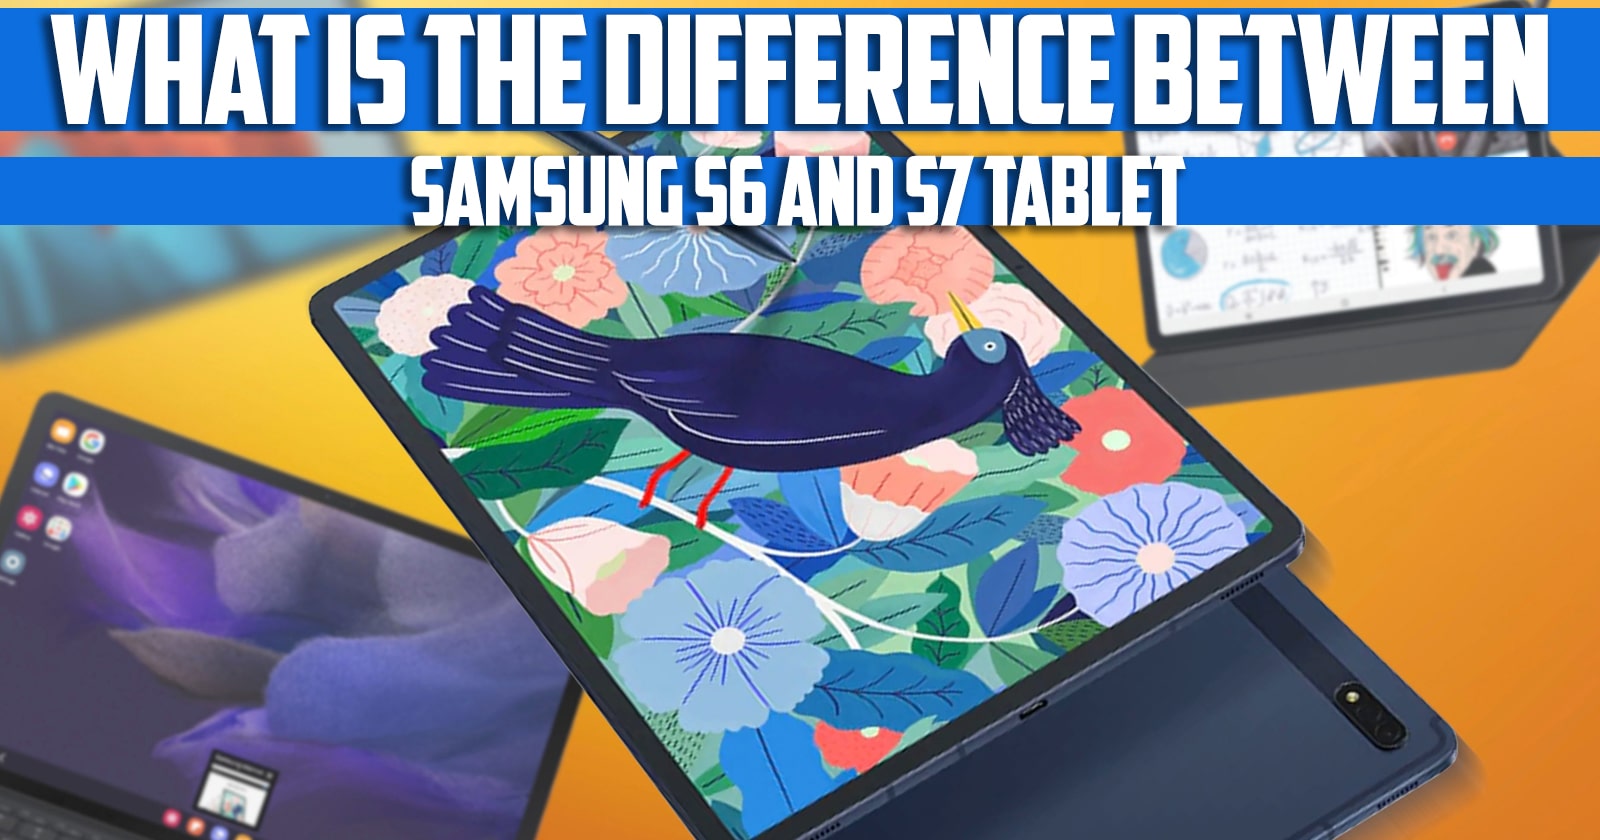 What is the difference between Samsung s6 and s7 tablet?